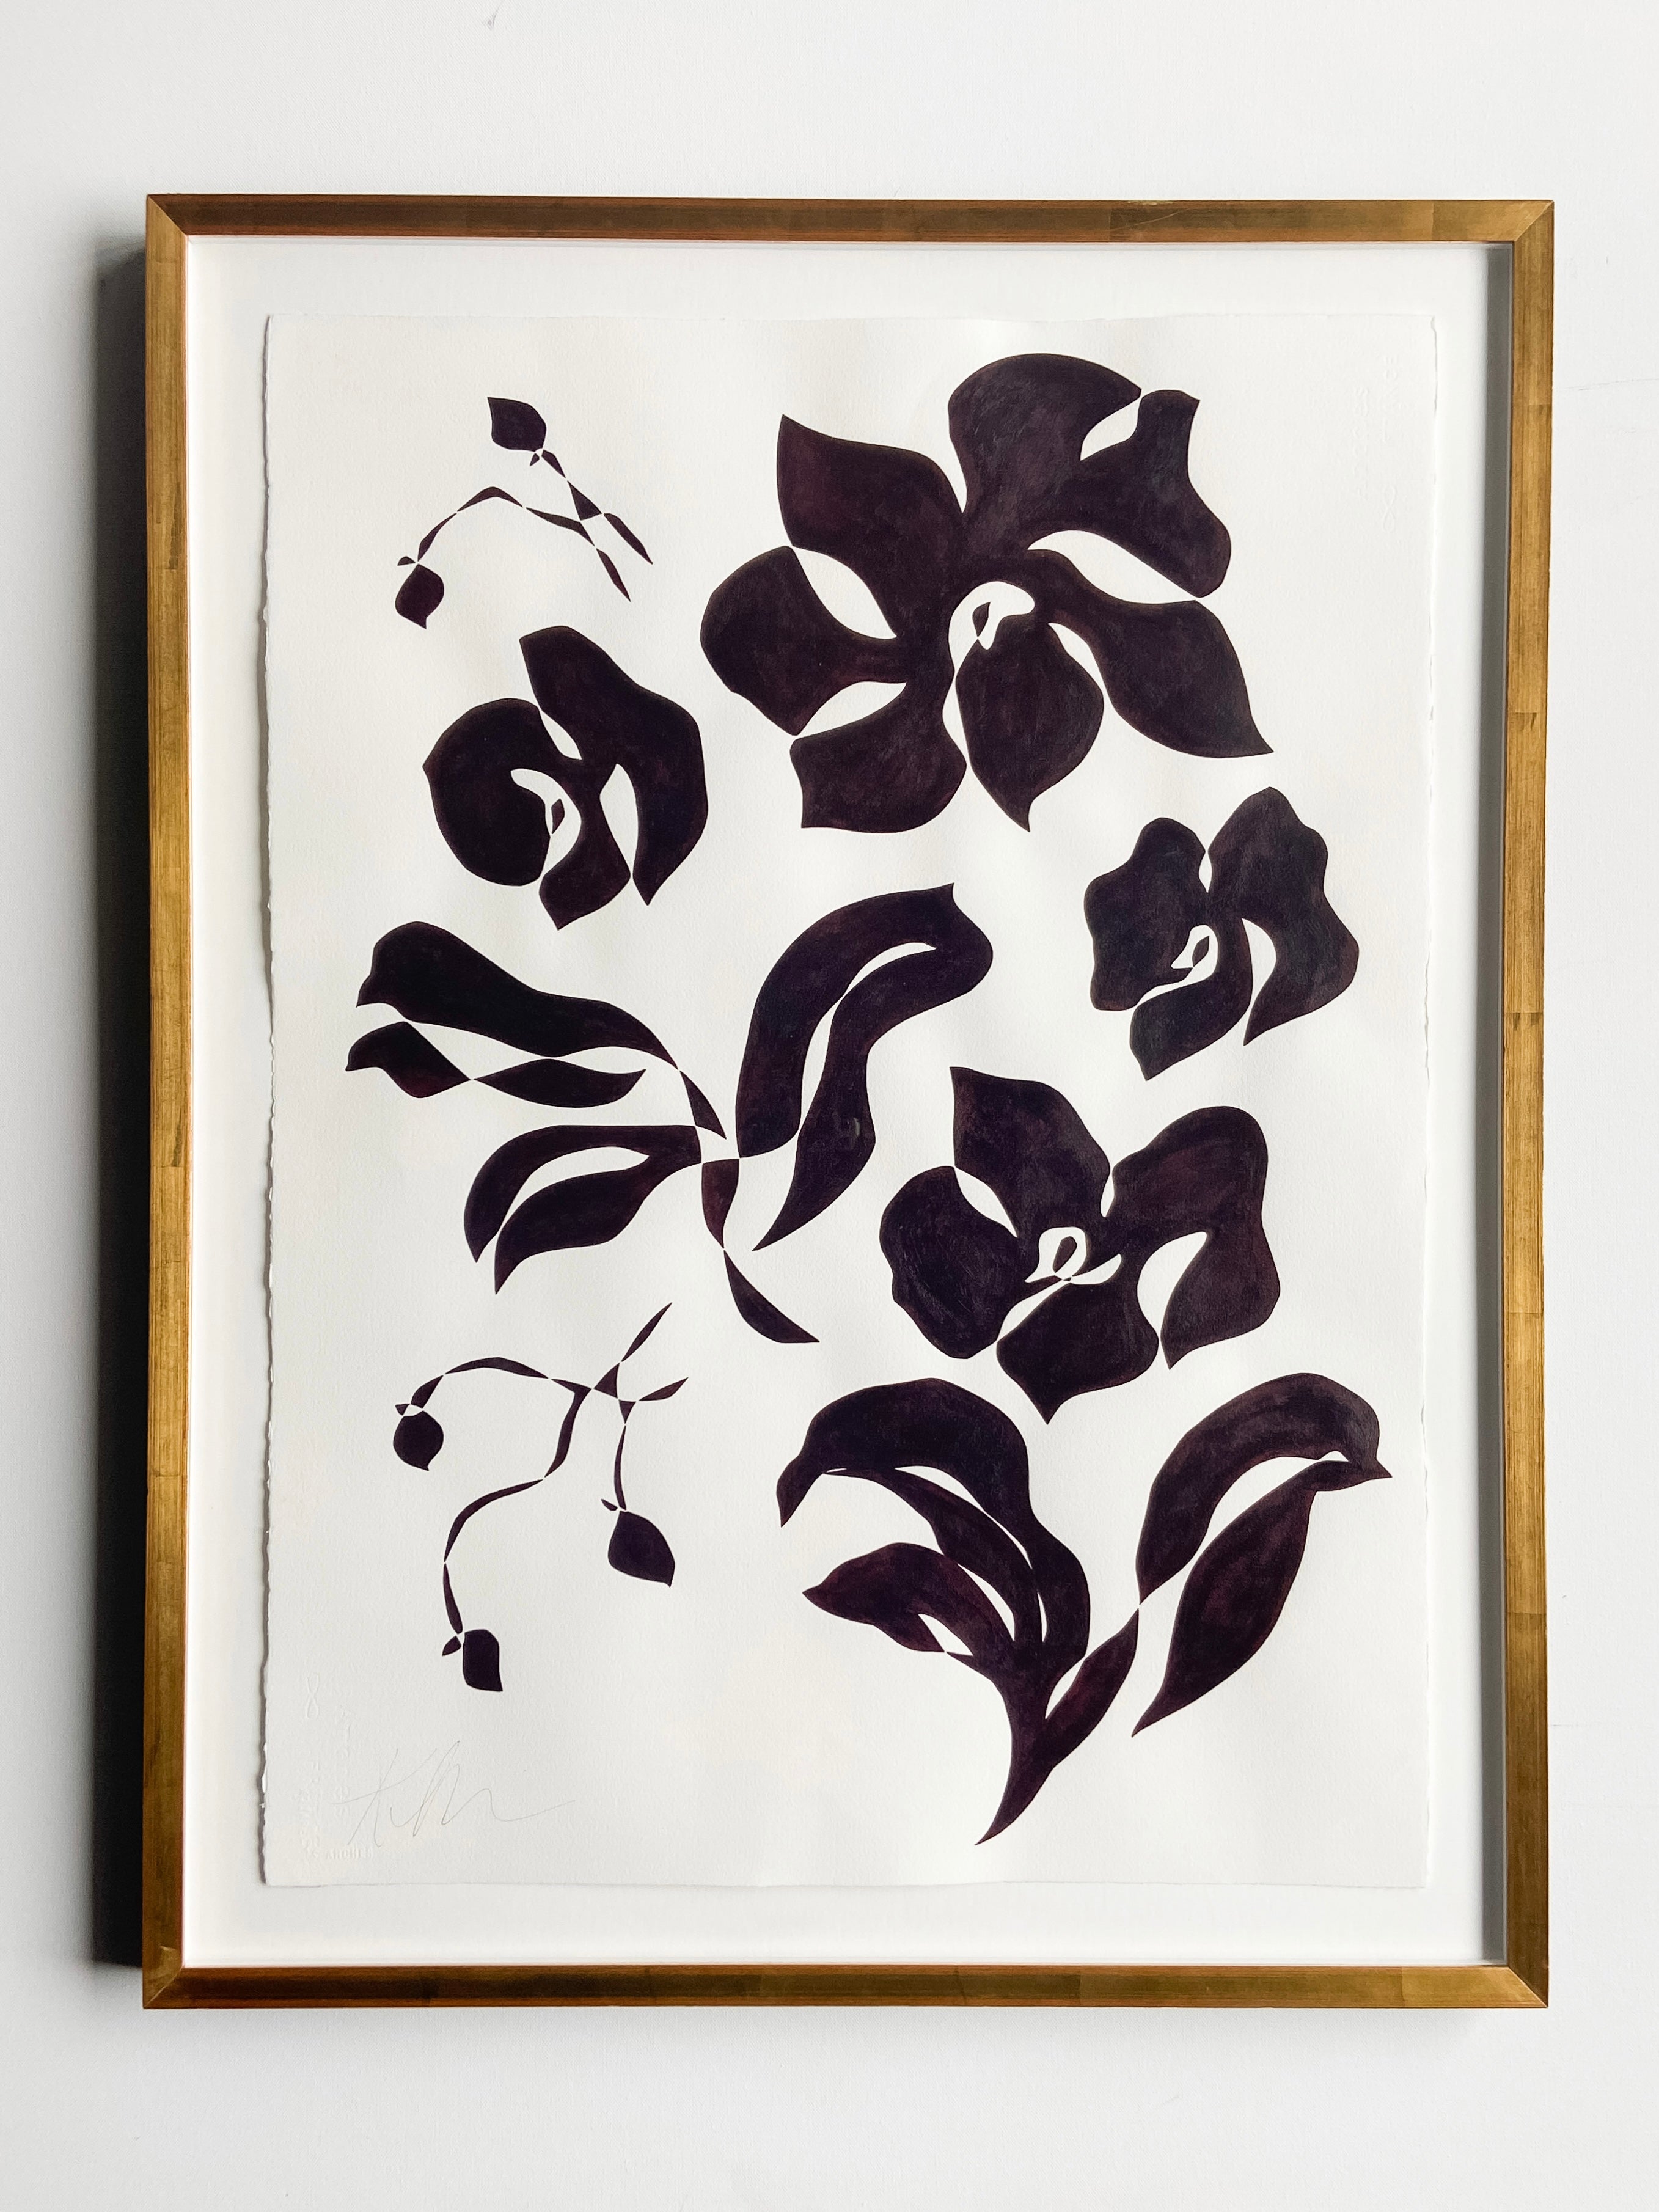 Black floral artwork in a gold frame on a white background